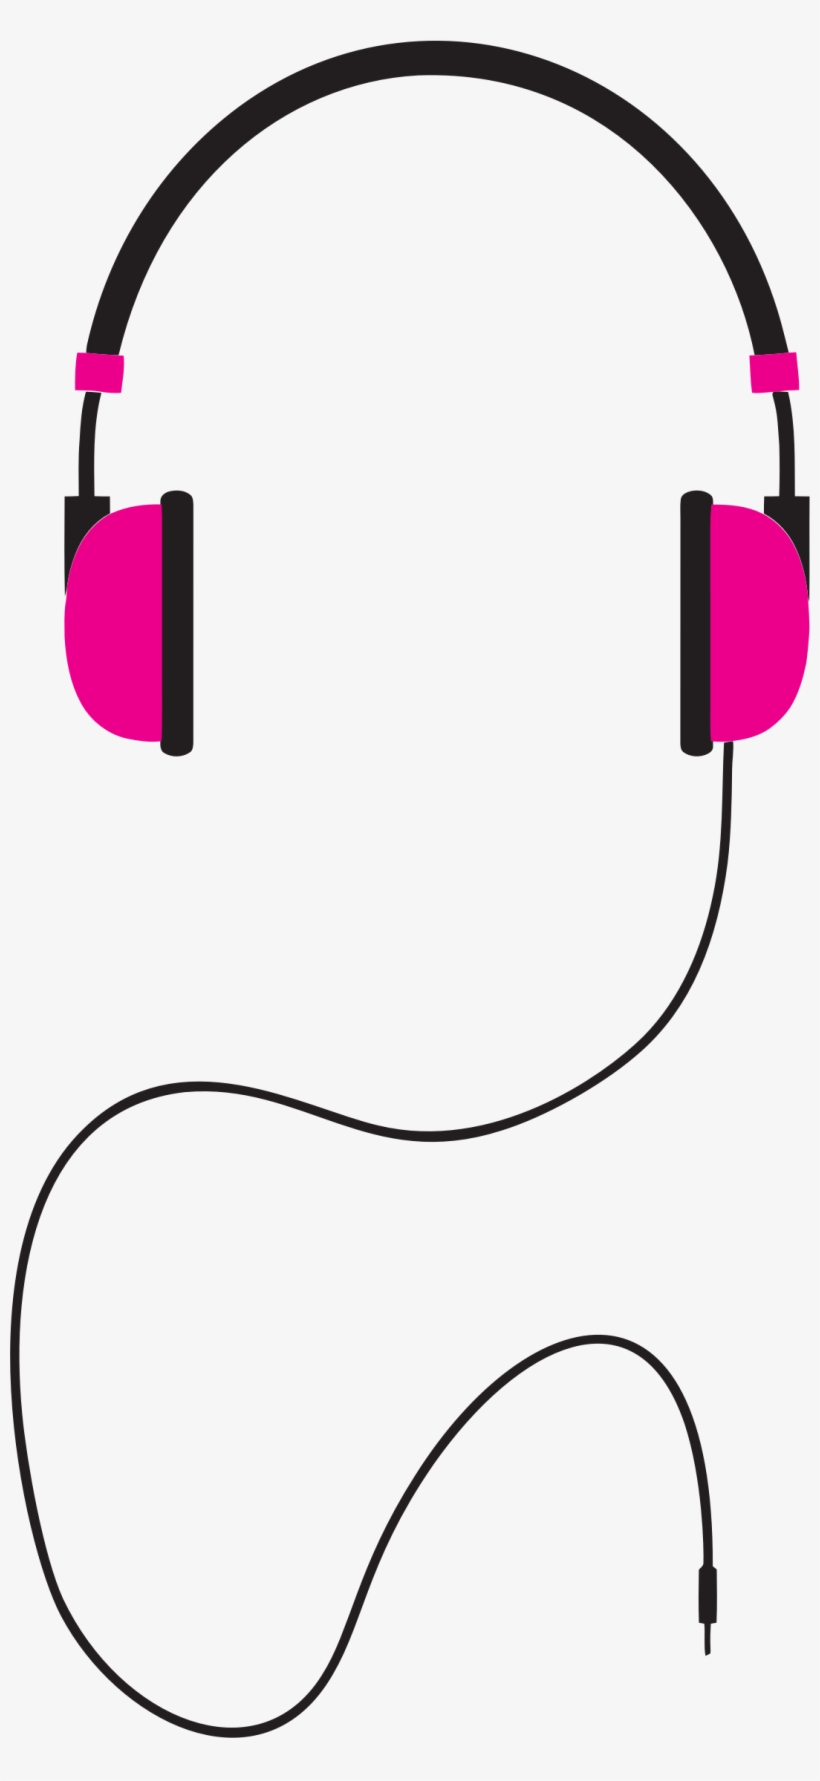 This Free Icons Png Design Of Headphones Illustration, transparent png #1331177